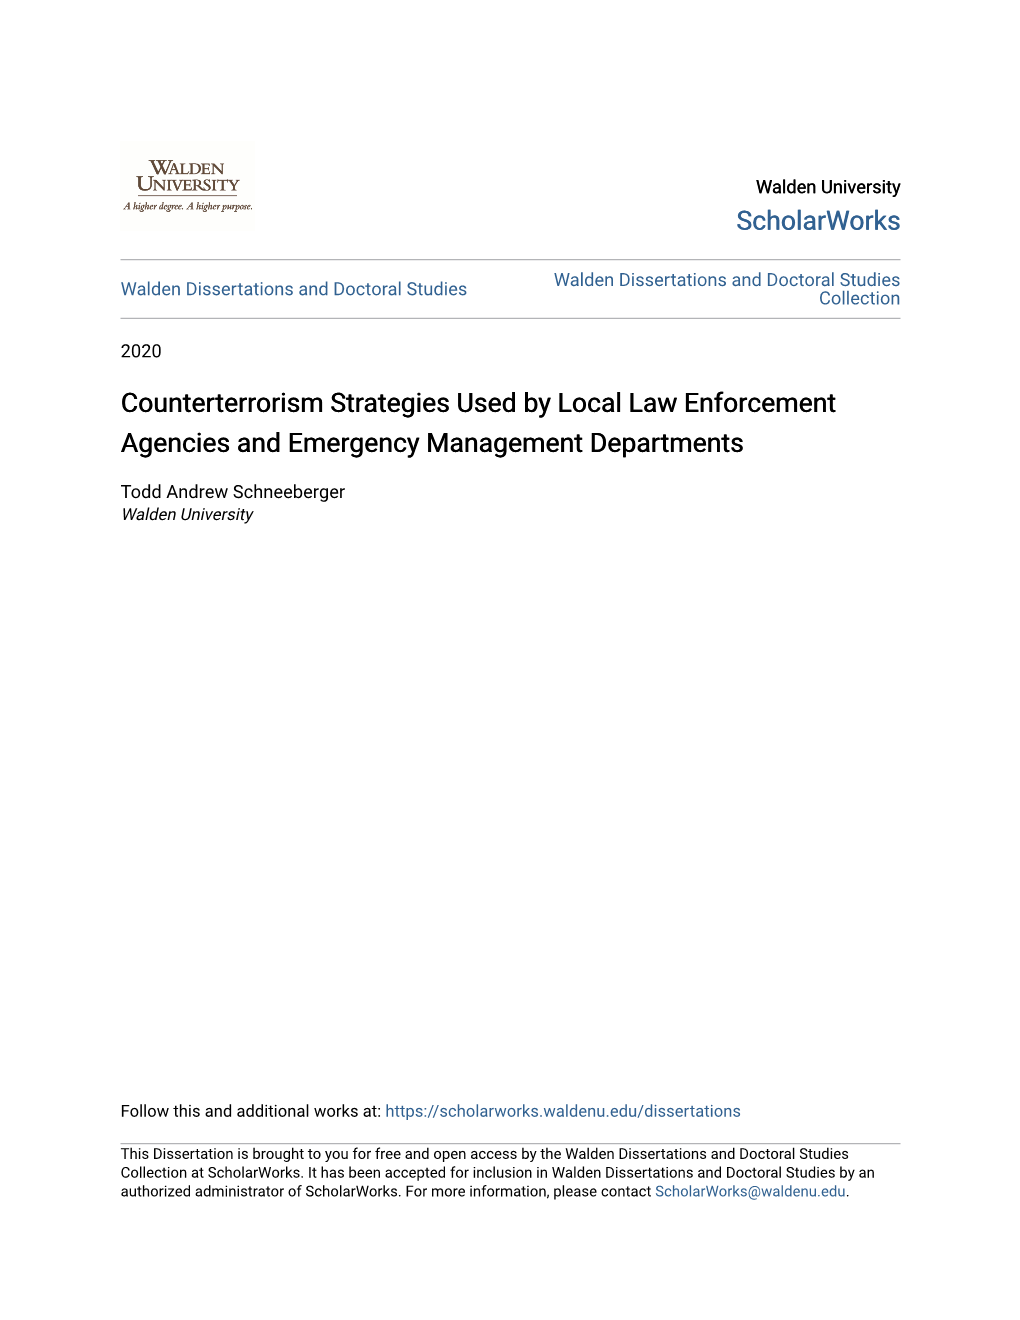 Counterterrorism Strategies Used by Local Law Enforcement Agencies and Emergency Management Departments